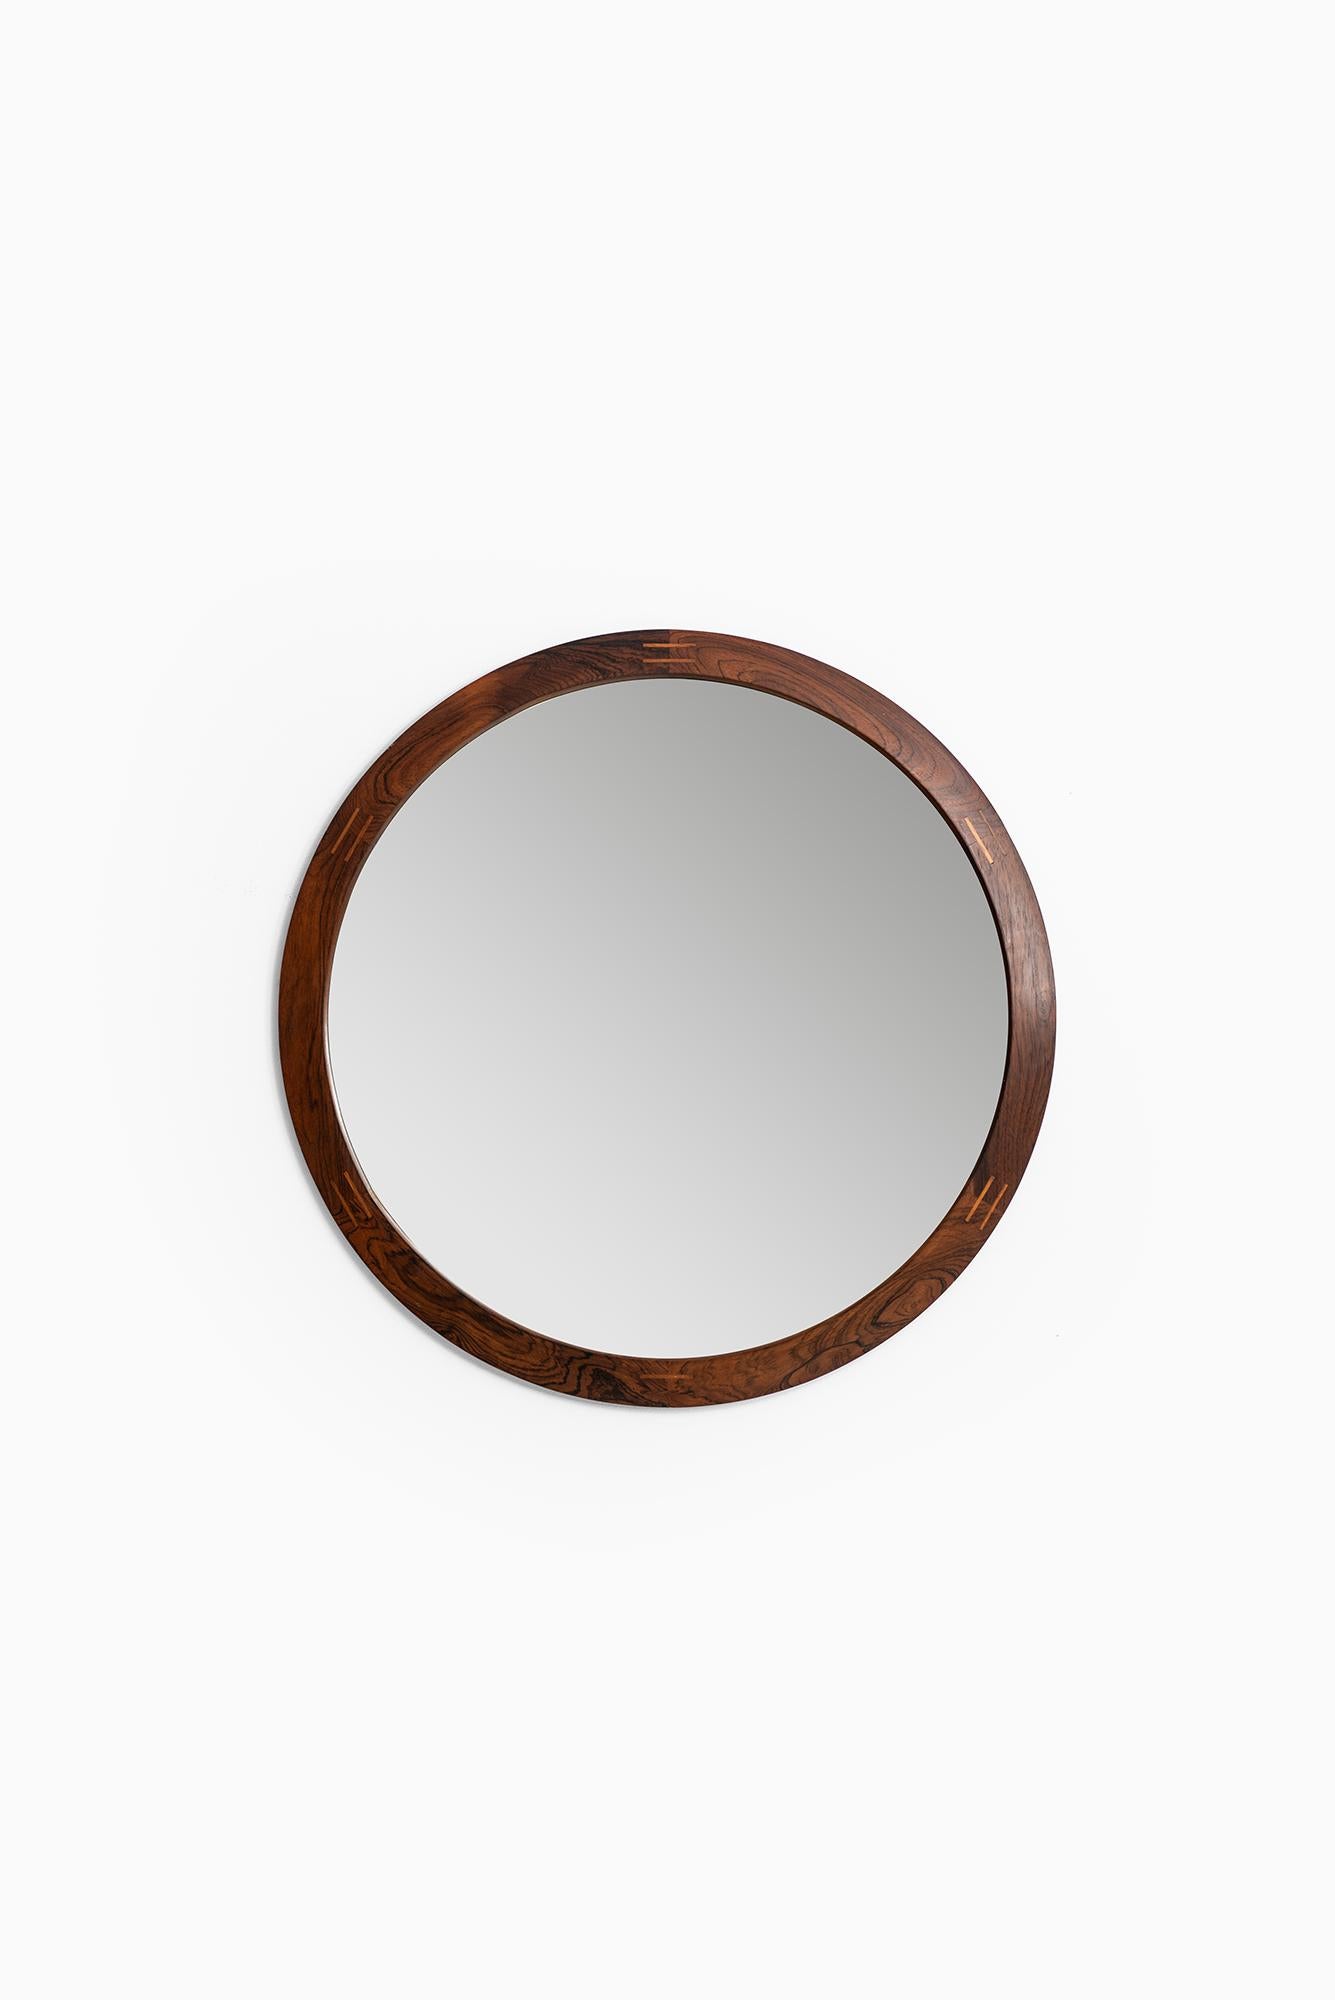 Rare round mirror in rosewood designed by Aksel Kjersgaard. Produced by Odder in Denmark.